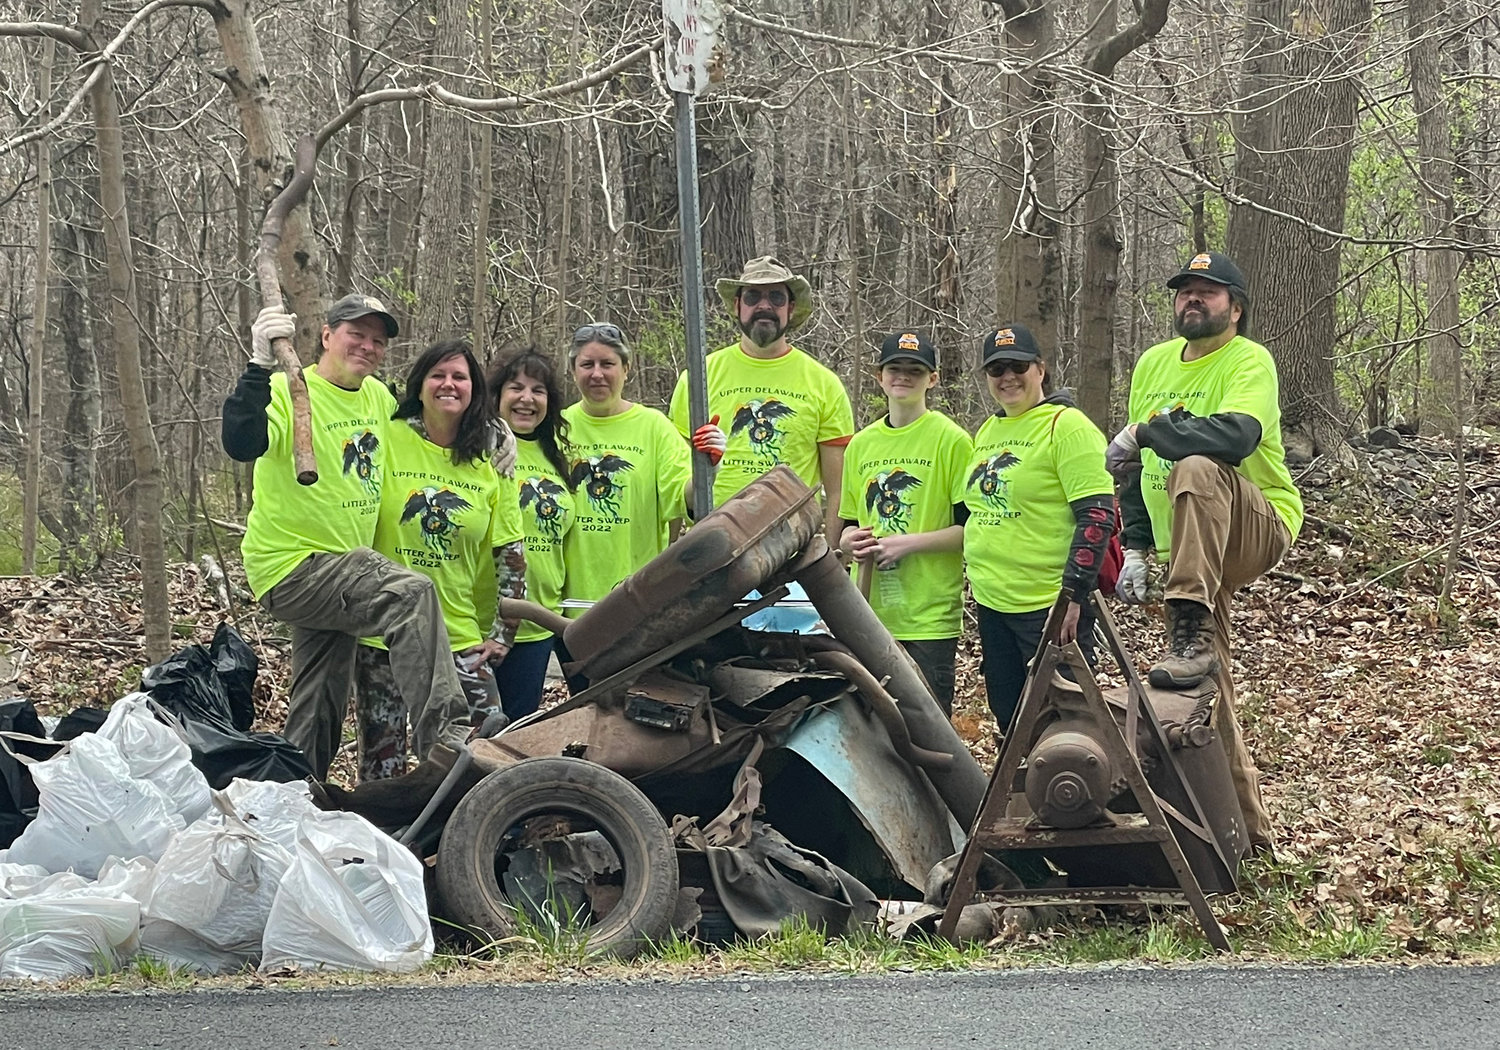 From left to right-Andy Russ, Susan Fraysse Russ, Liz Peterson, Jamie Macri, Austin Hand, Sadie Hand and Sarit Hand. During the Upper Delaware Council’s Litter Pluck last weekend the amazing Dark Forest Creation Crew of volunteers from the Burn Brae Mansion in Glen Spey found loads of metal buckets, piles of tires, bottles, almost an entire car, a bumper with the license plate still attached and a rusted out Sears and Roebuck cement mixer and filled an additional twenty bags with trash. Andy Russ summed up all their hard trash collecting saying “we are undoing the misdeeds of others.”